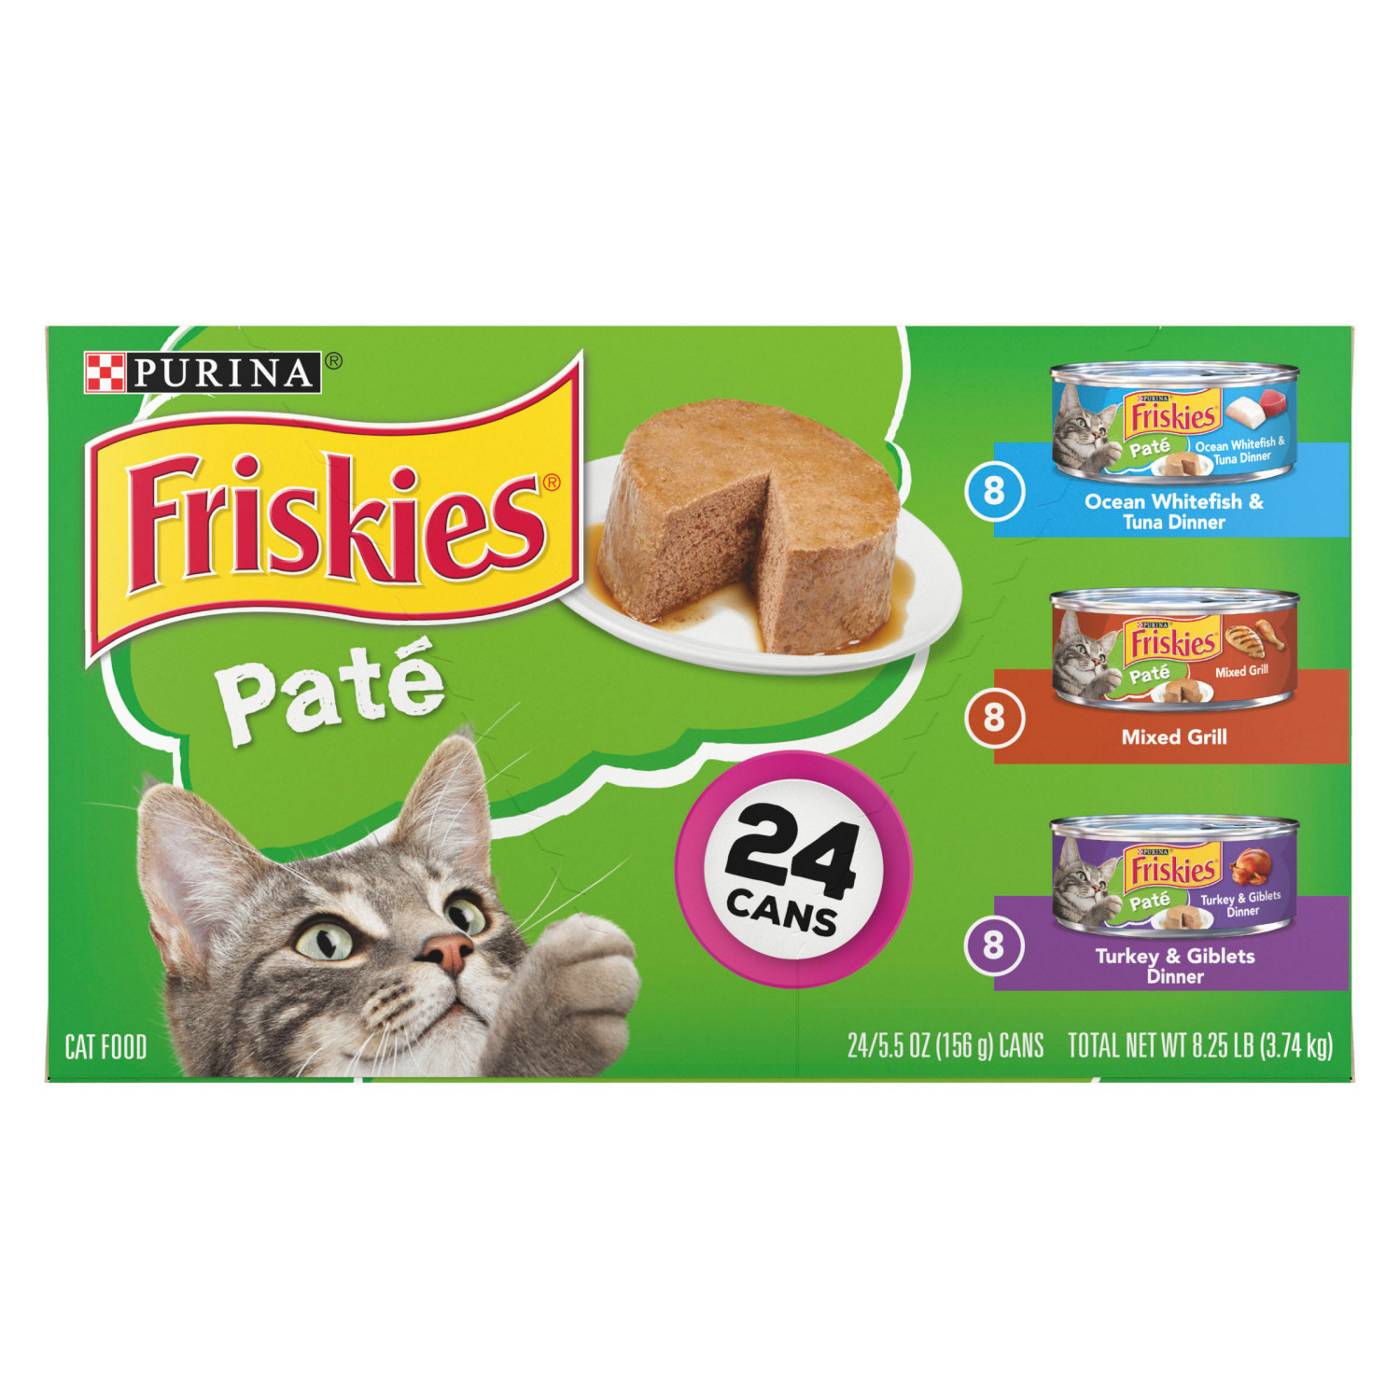 Friskies Purina Friskies Wet Cat Food Pate Variety Pack, Ocean Whitefish and Tuna, Mixed Grill and Turkey and Giblets Dinners; image 1 of 6